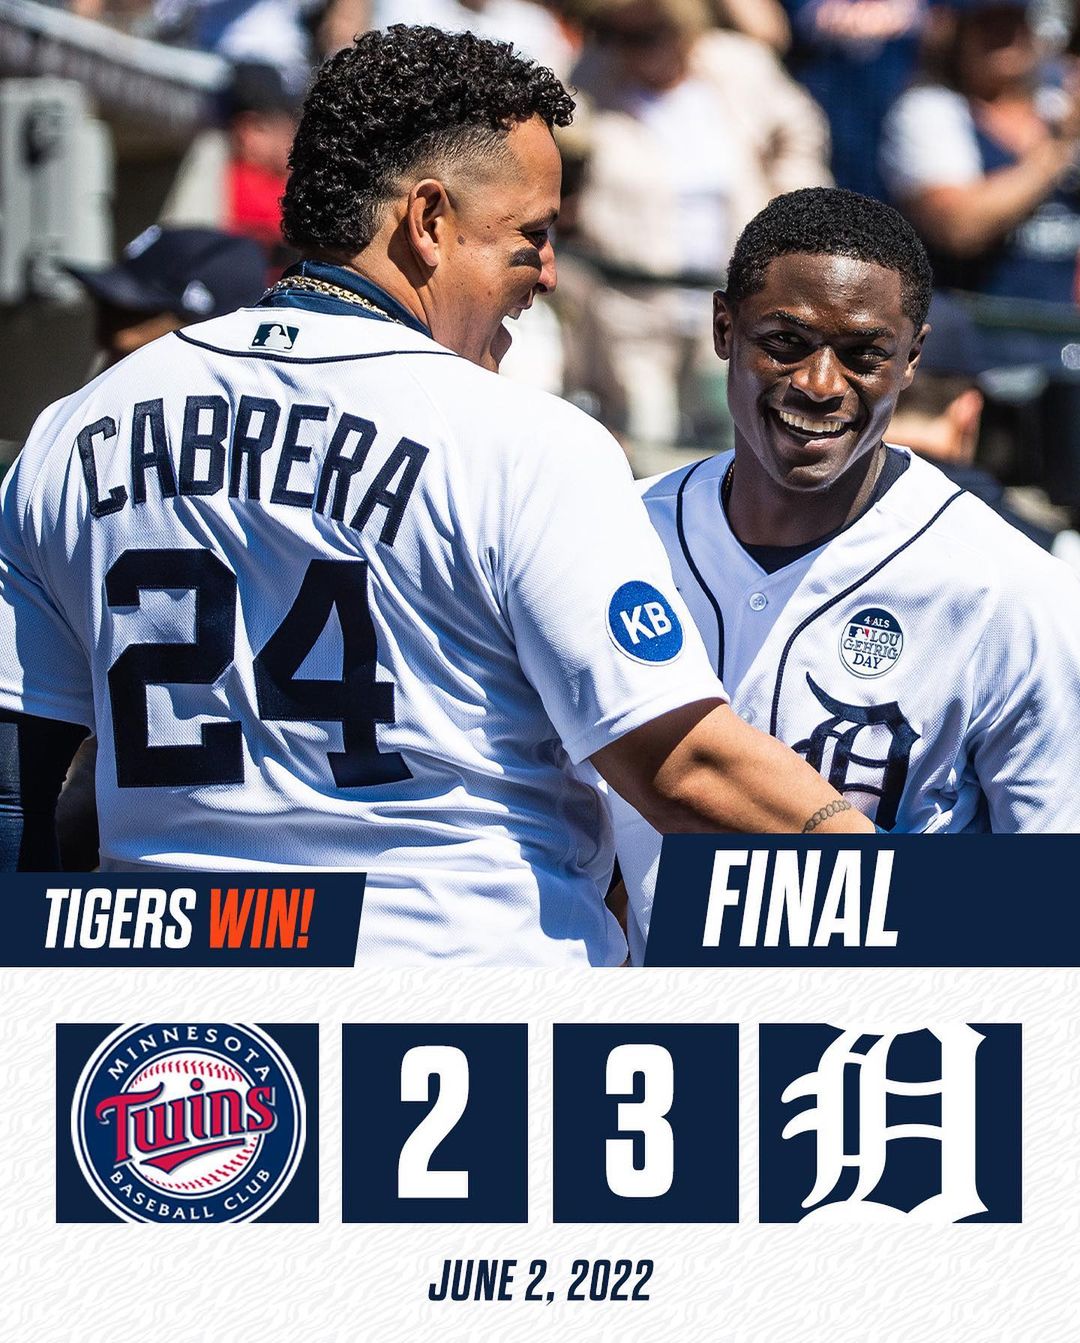 Snatched a W from the T_ins. #TigersWin...